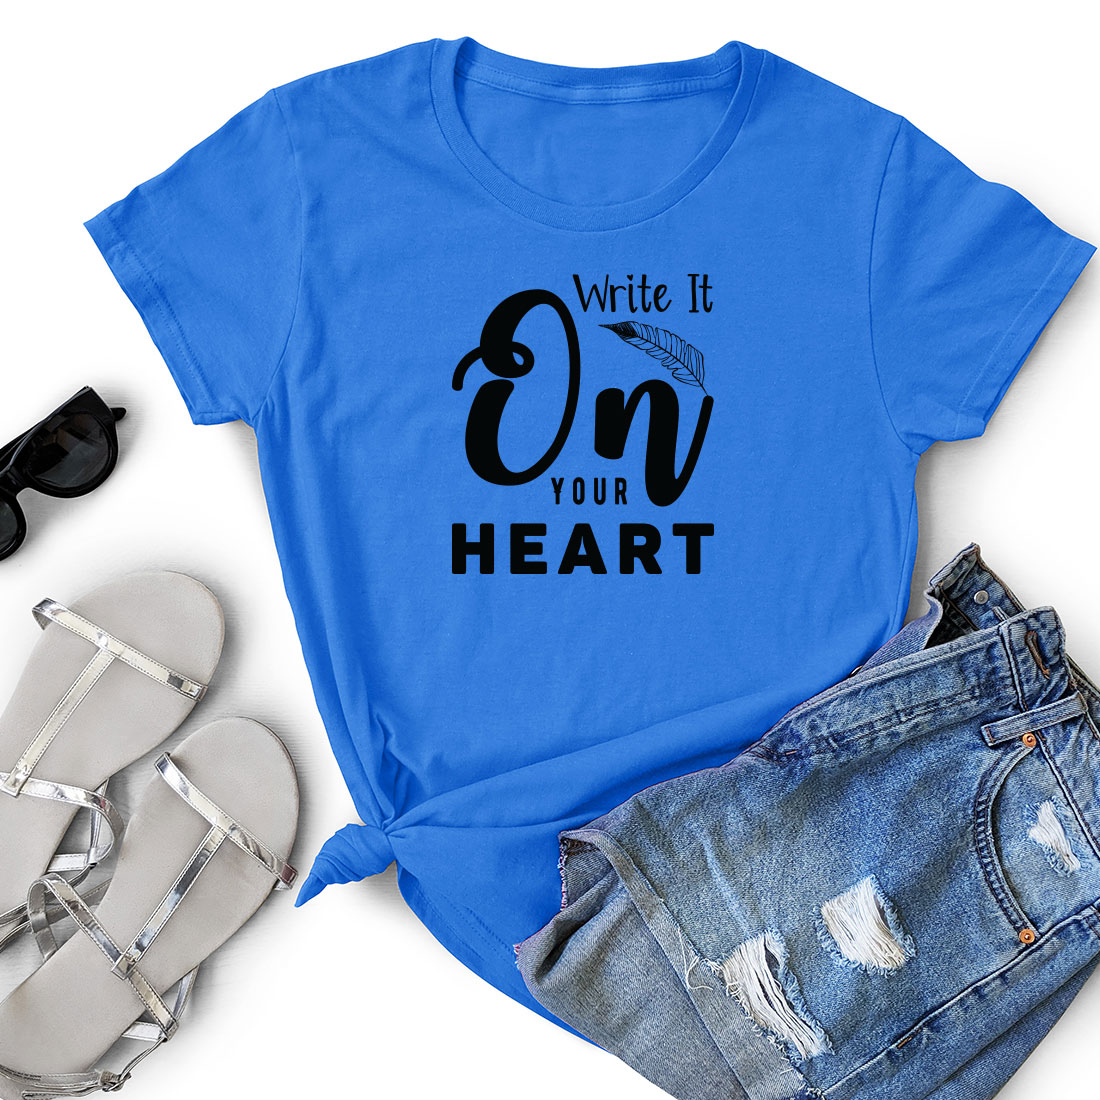 T - shirt that says write it on your heart.